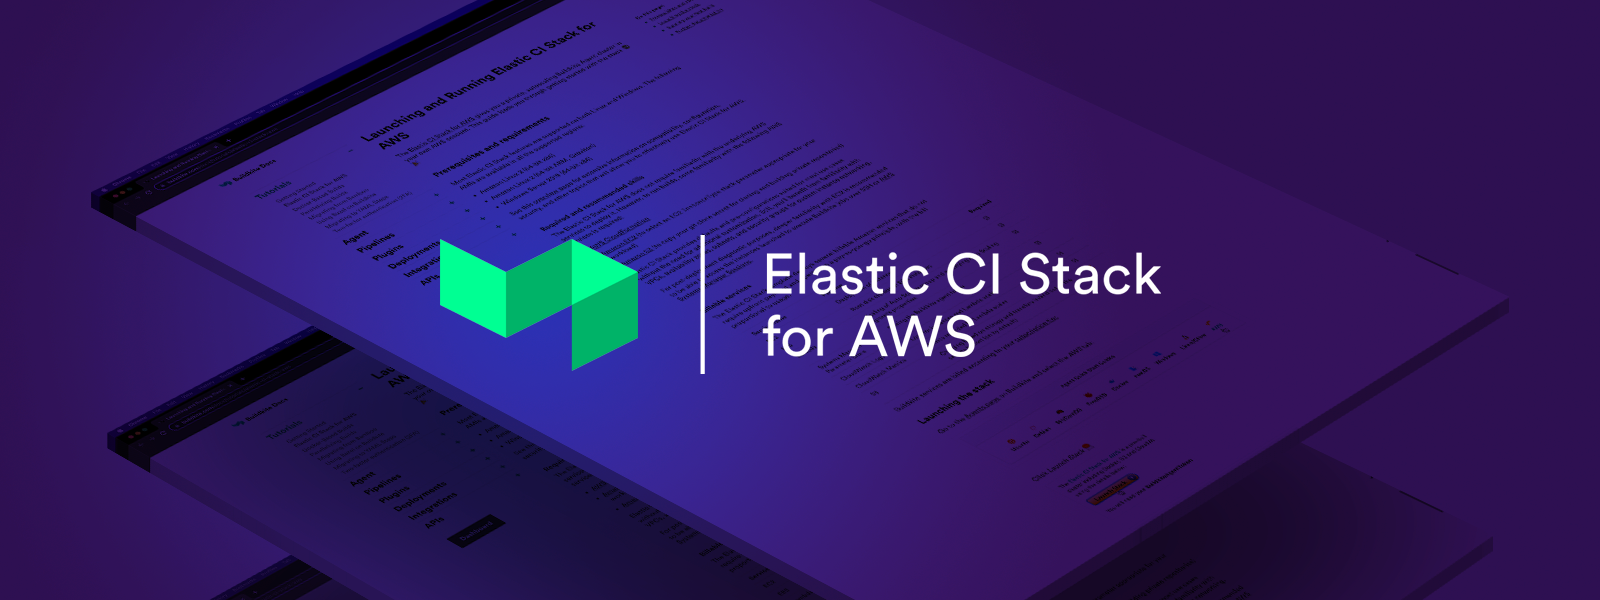 Elastic CI Stack for AWS